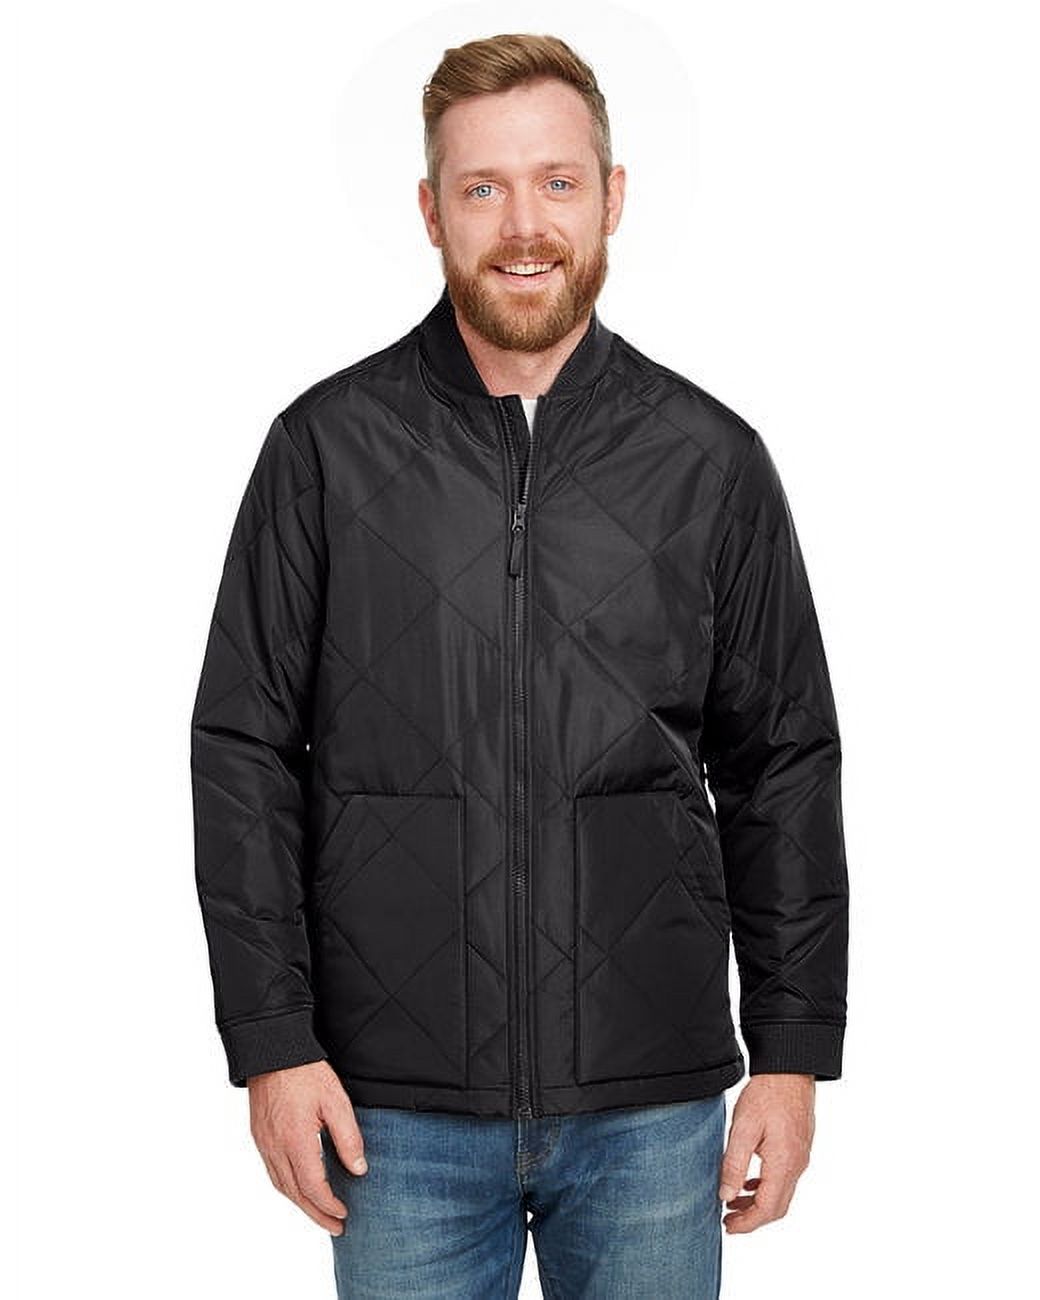 Adult Dockside Insulated Utility Jacket - DARK CHARCOAL - XL - image 1 of 3